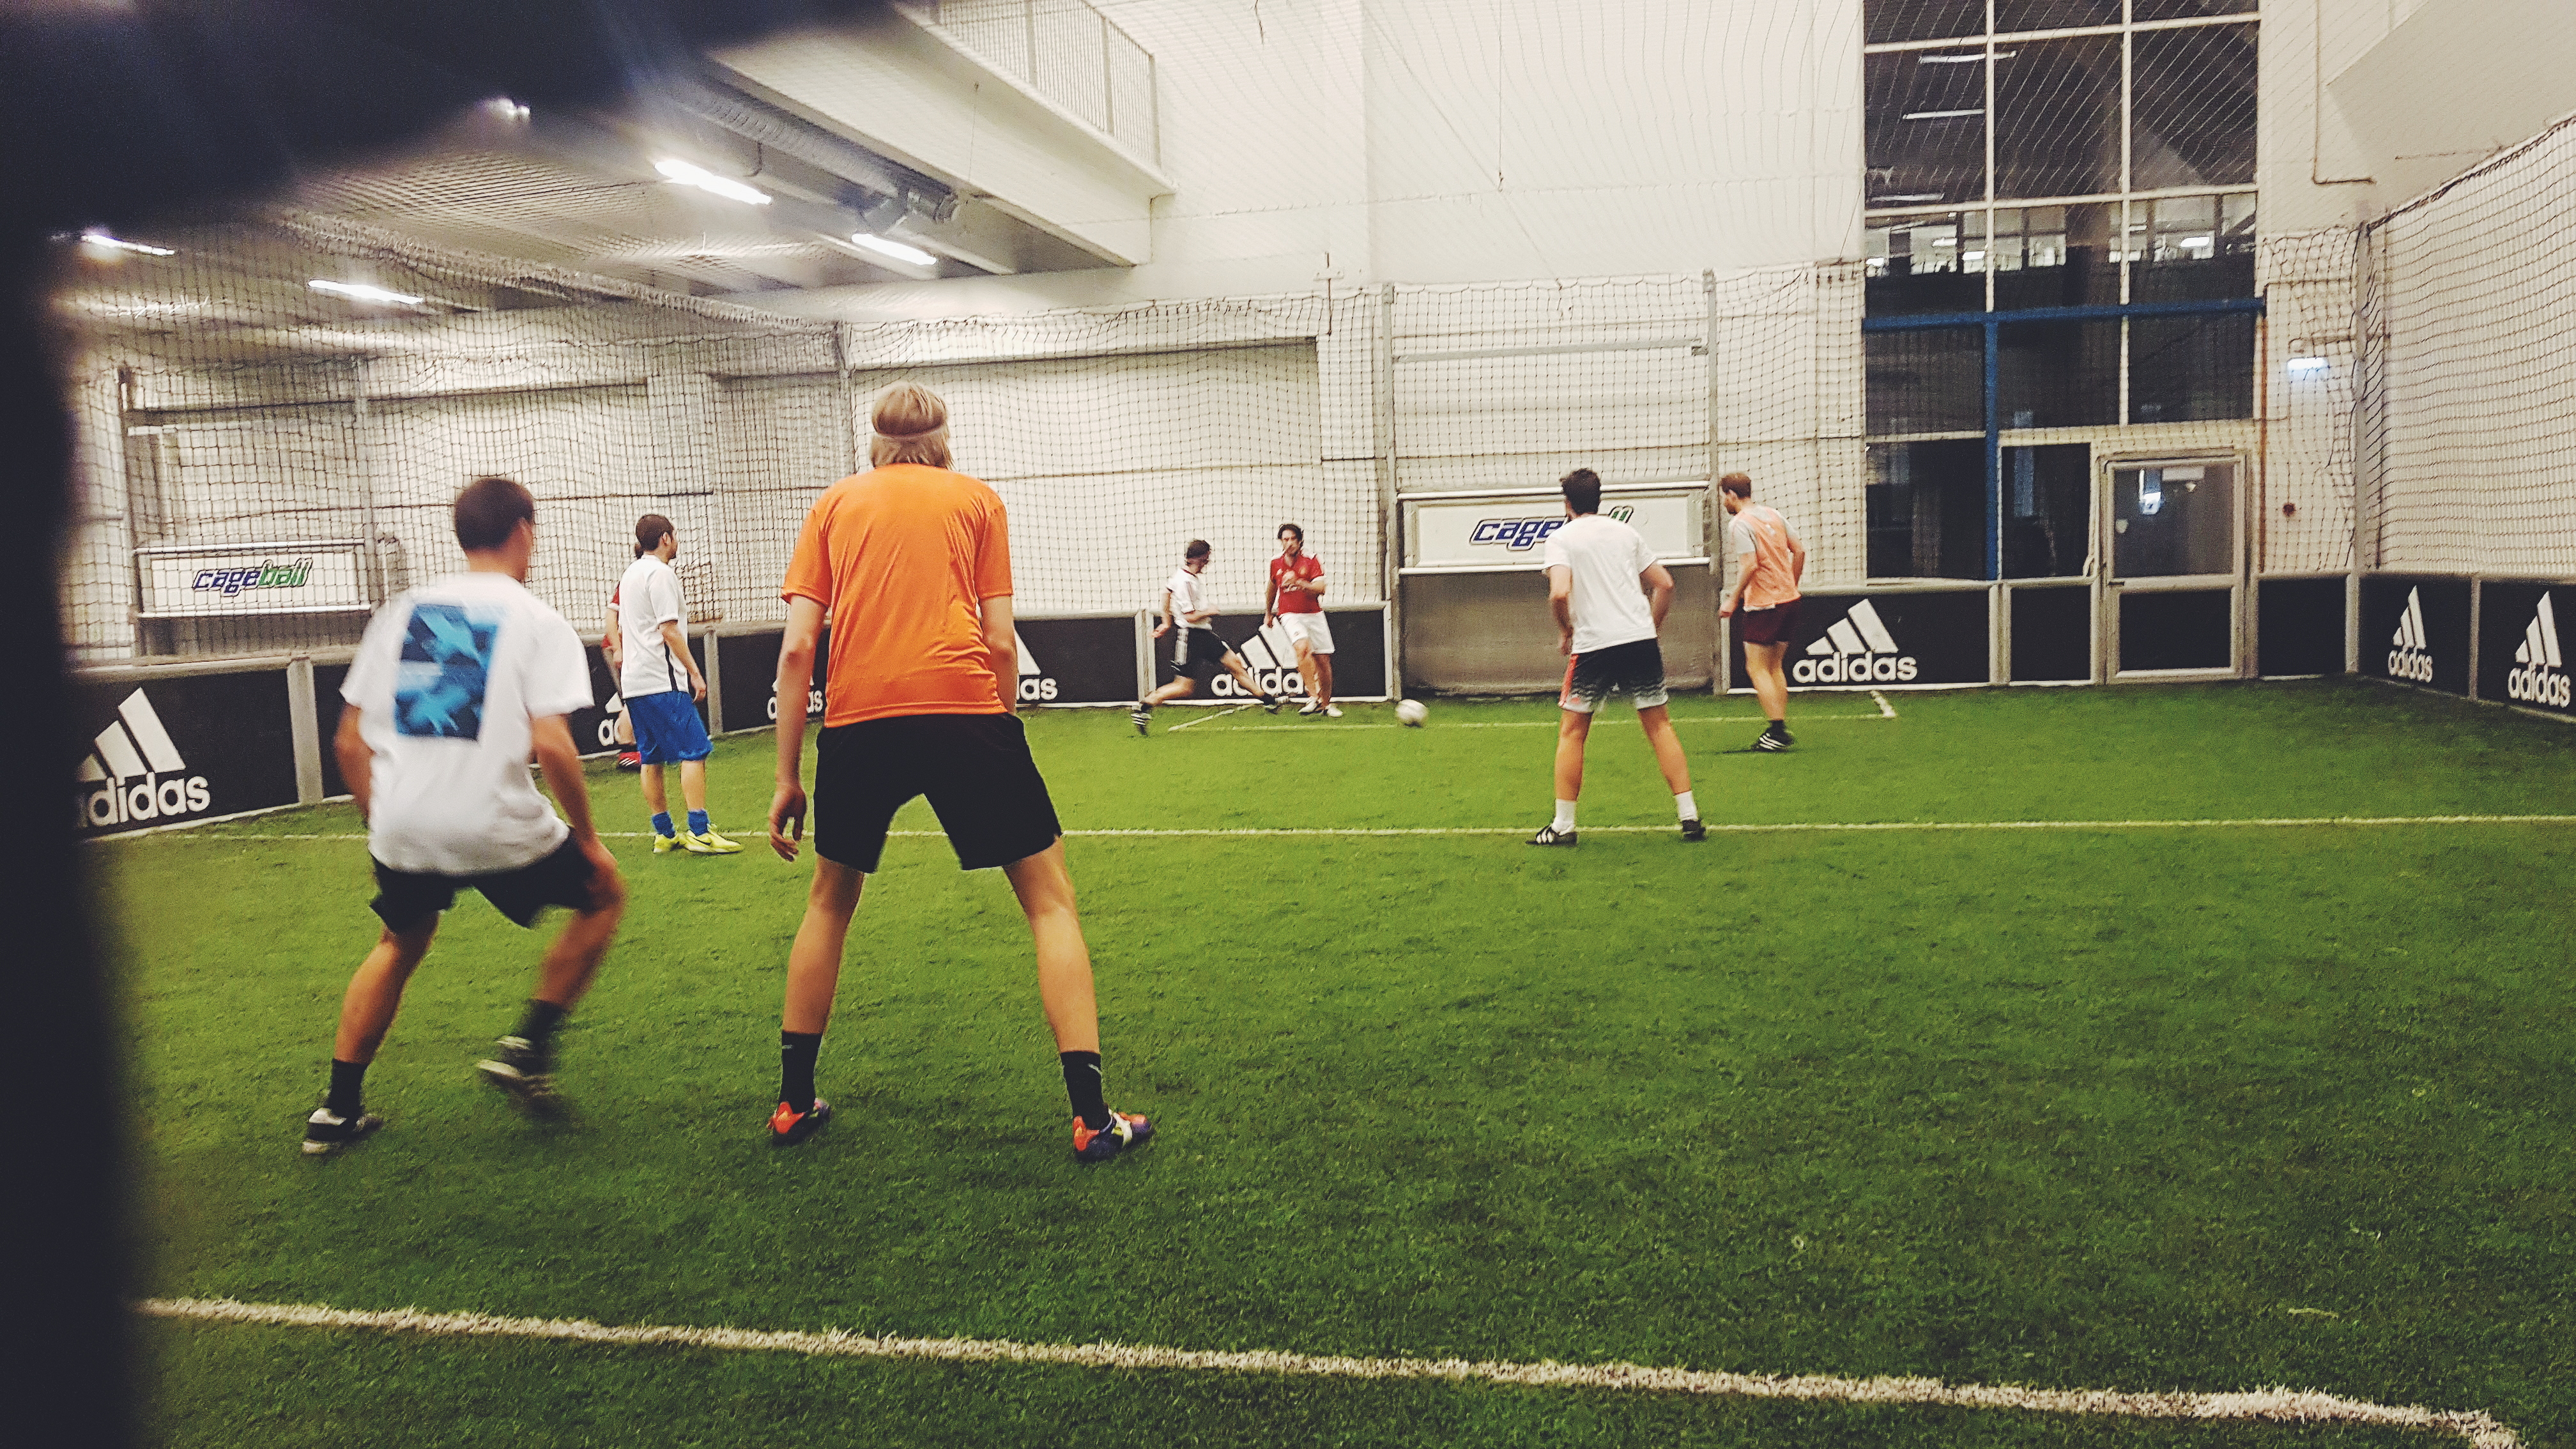 A photo of a small indoor football pitch with a group of boys mid-game, kicking a ball around the surface of the artificial grass.